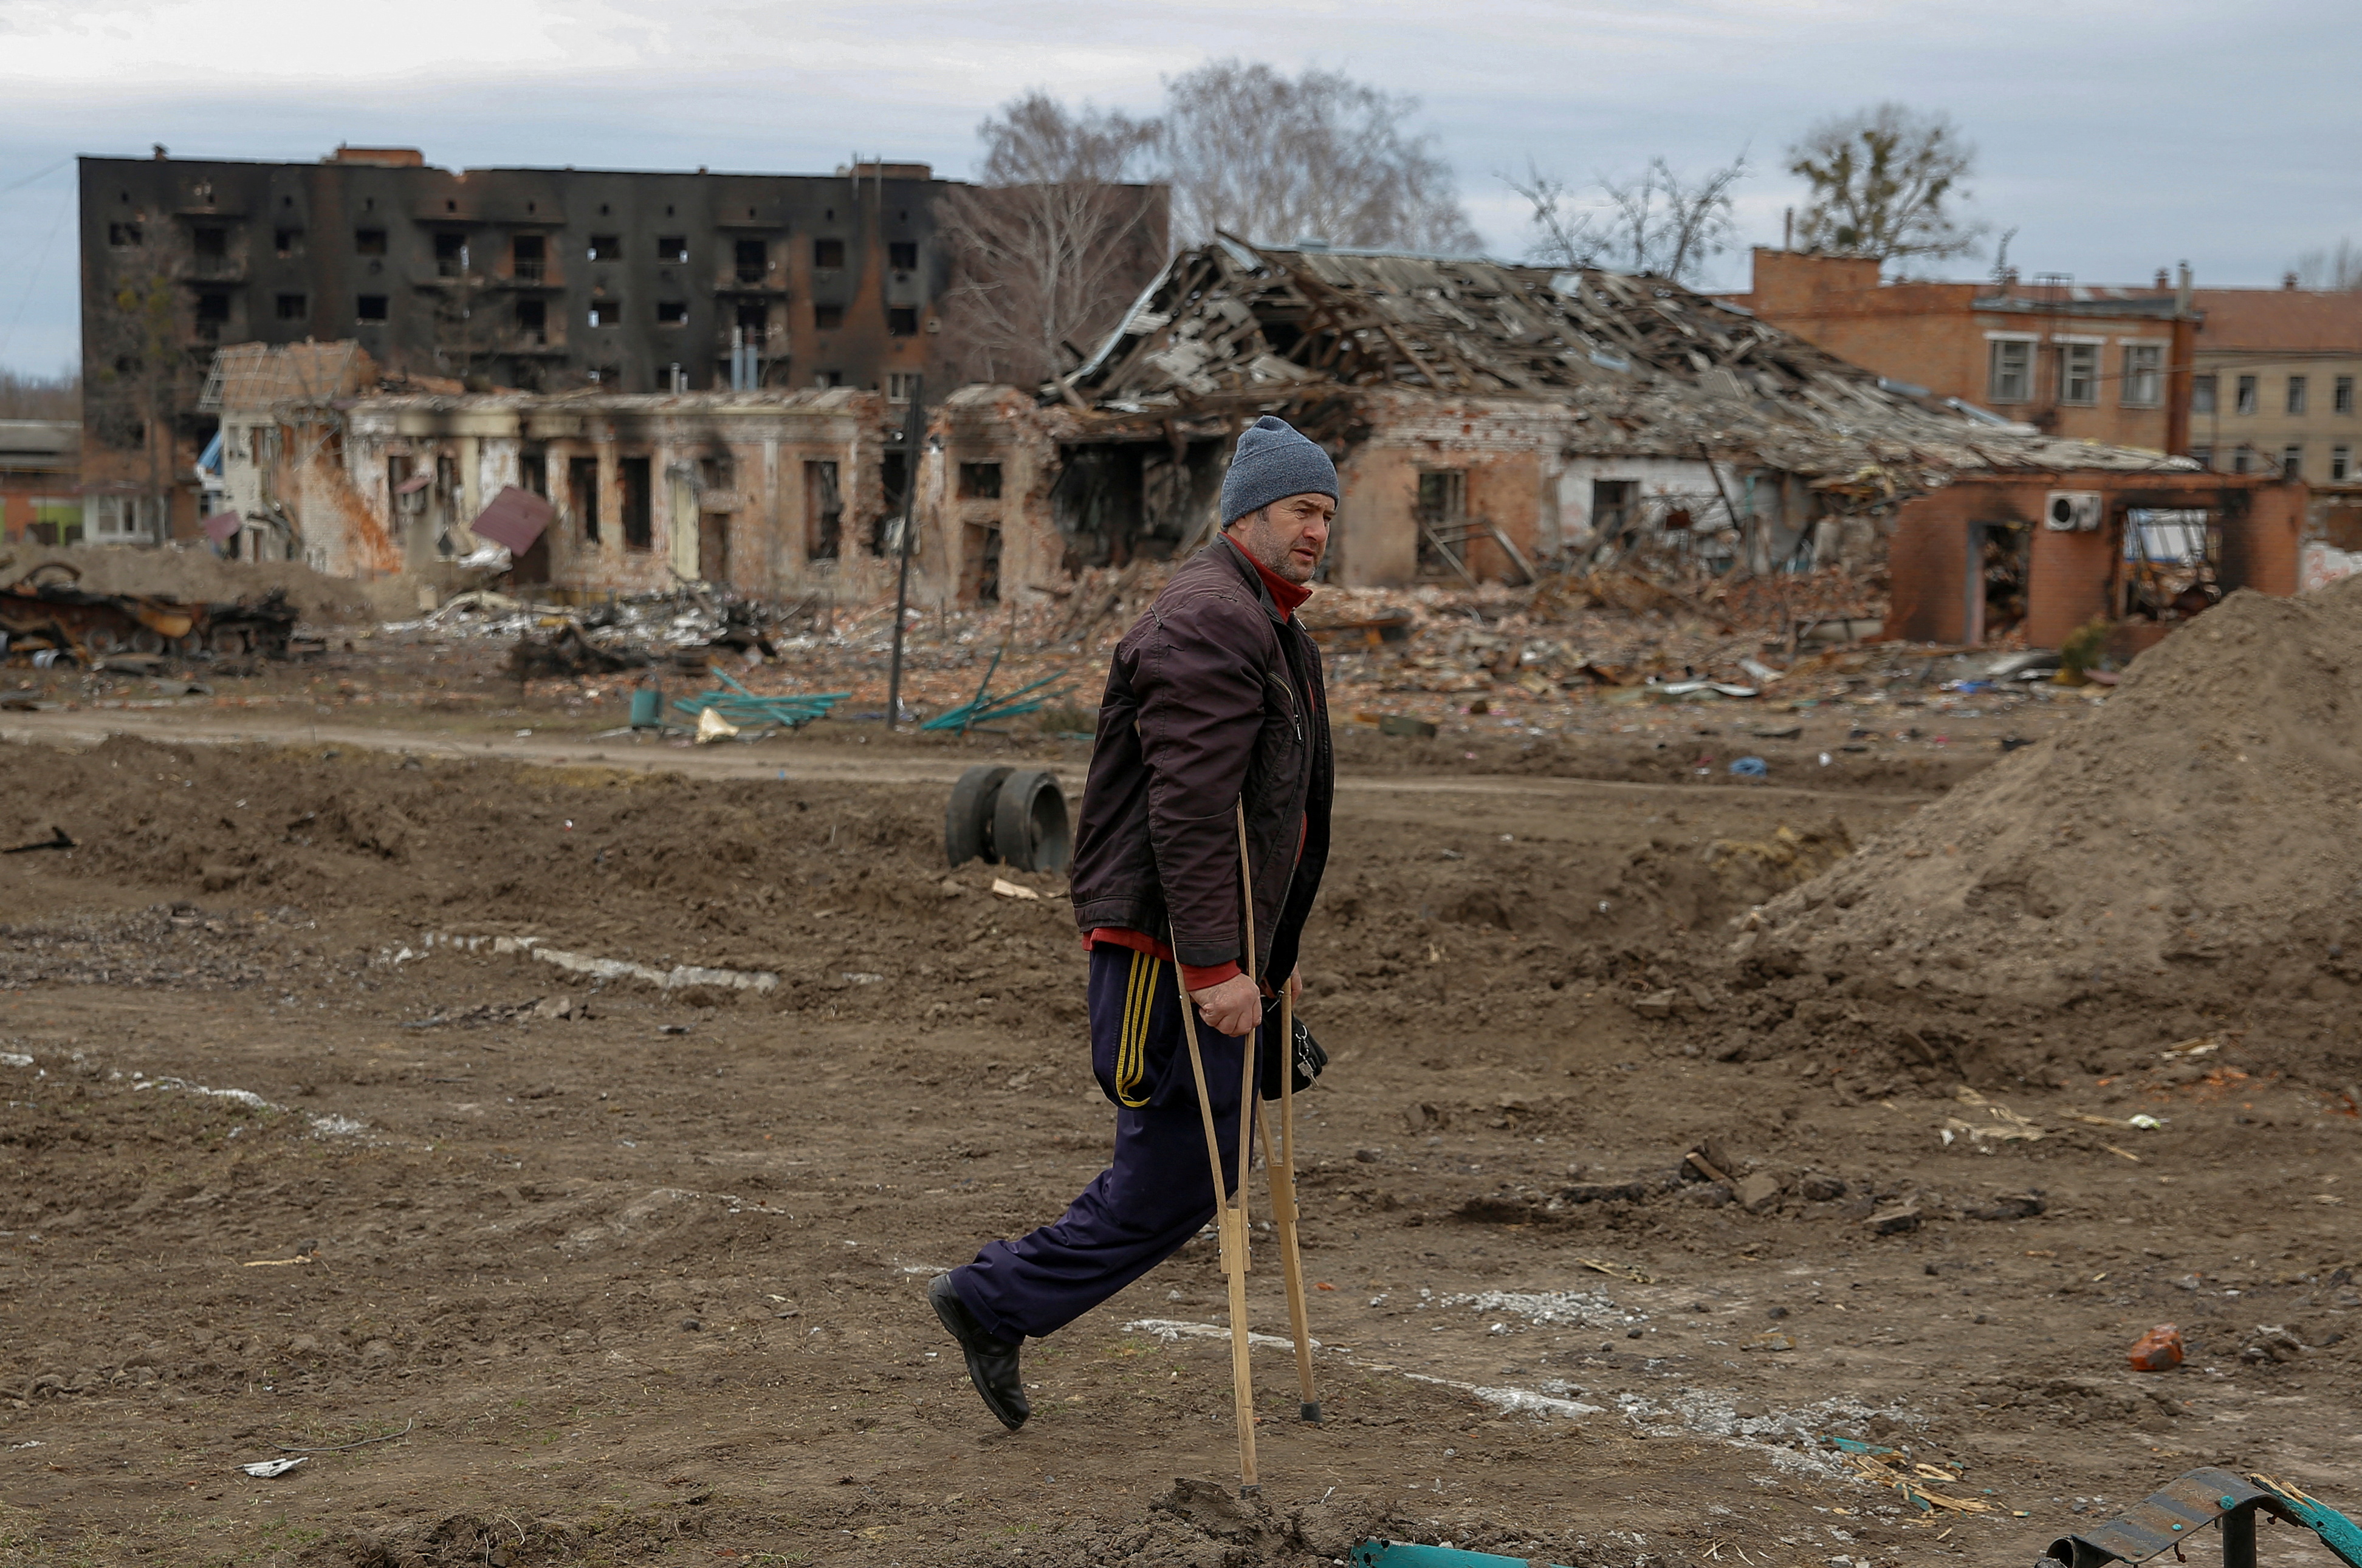 A local resident walks along a square damaged by shelling, as Russia’s attack on Ukraine continues, in the town of Trostianets, in Sumy region, Ukraine March 28, 2022. Picture taken March 28, 2022. REUTERS/Oleg Pereverzev